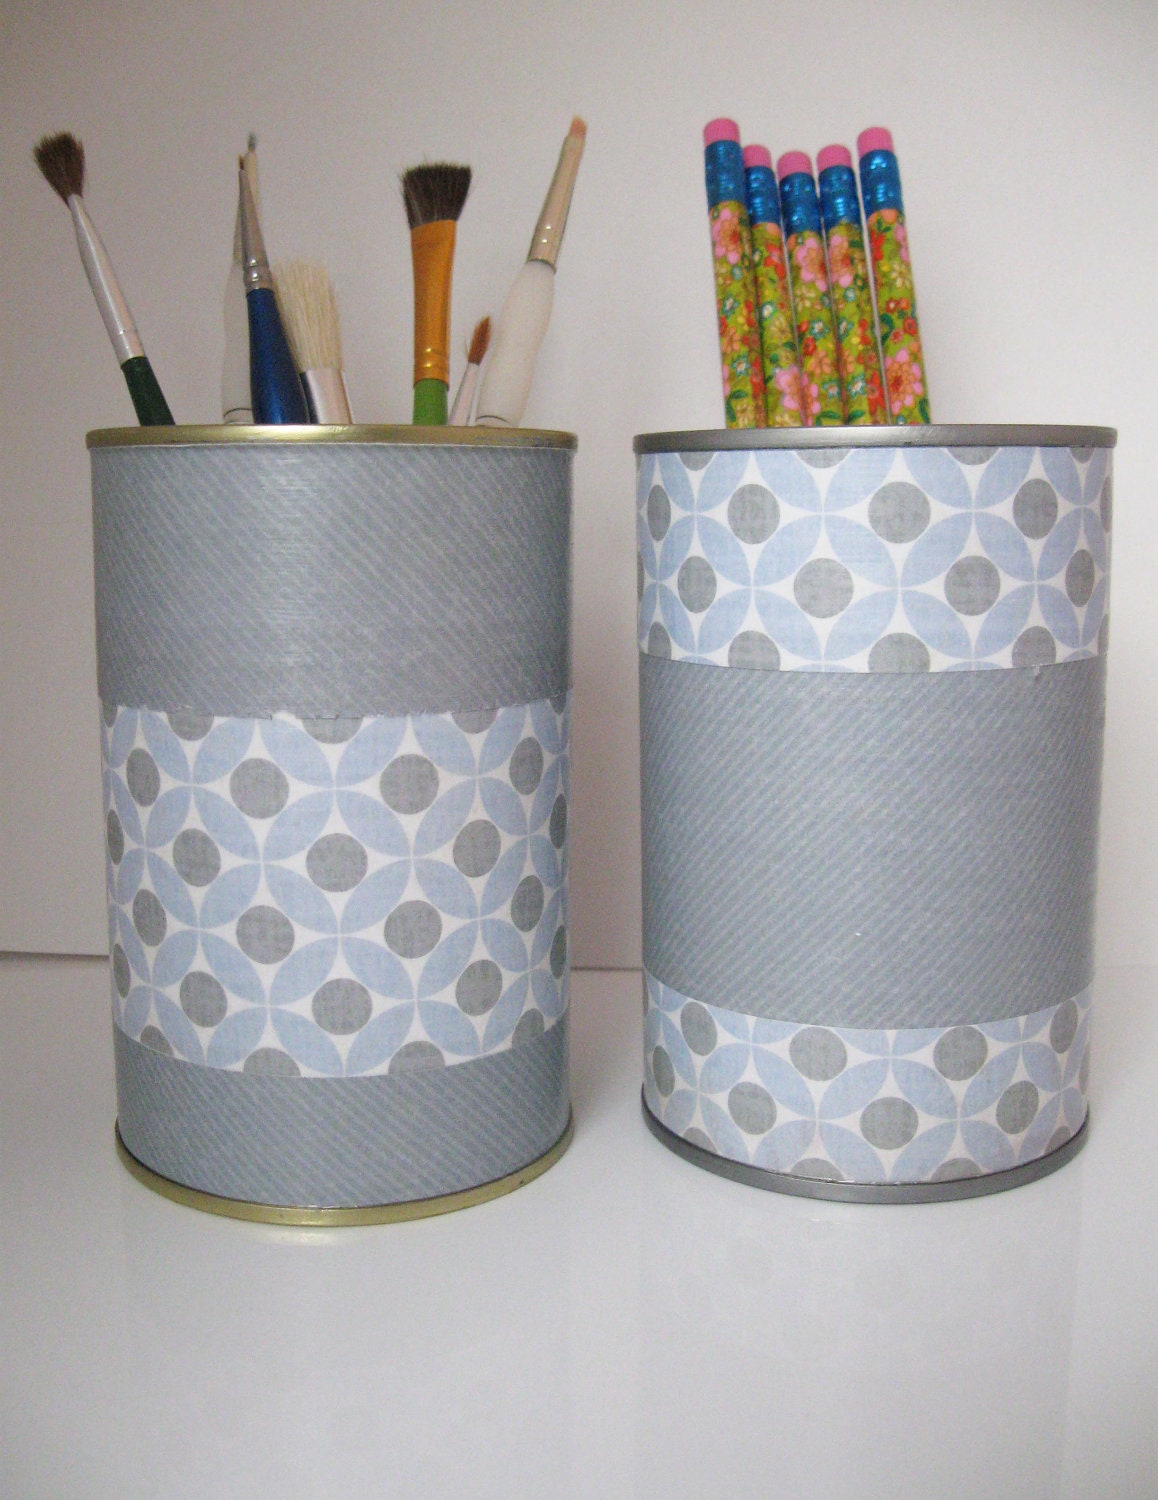 Upcycled Repurposed Tin Can Desk Accessories Pencil Brush Pen Holder Organizer Blue Gray Mod Style for Home Decor - BubbaAndToots